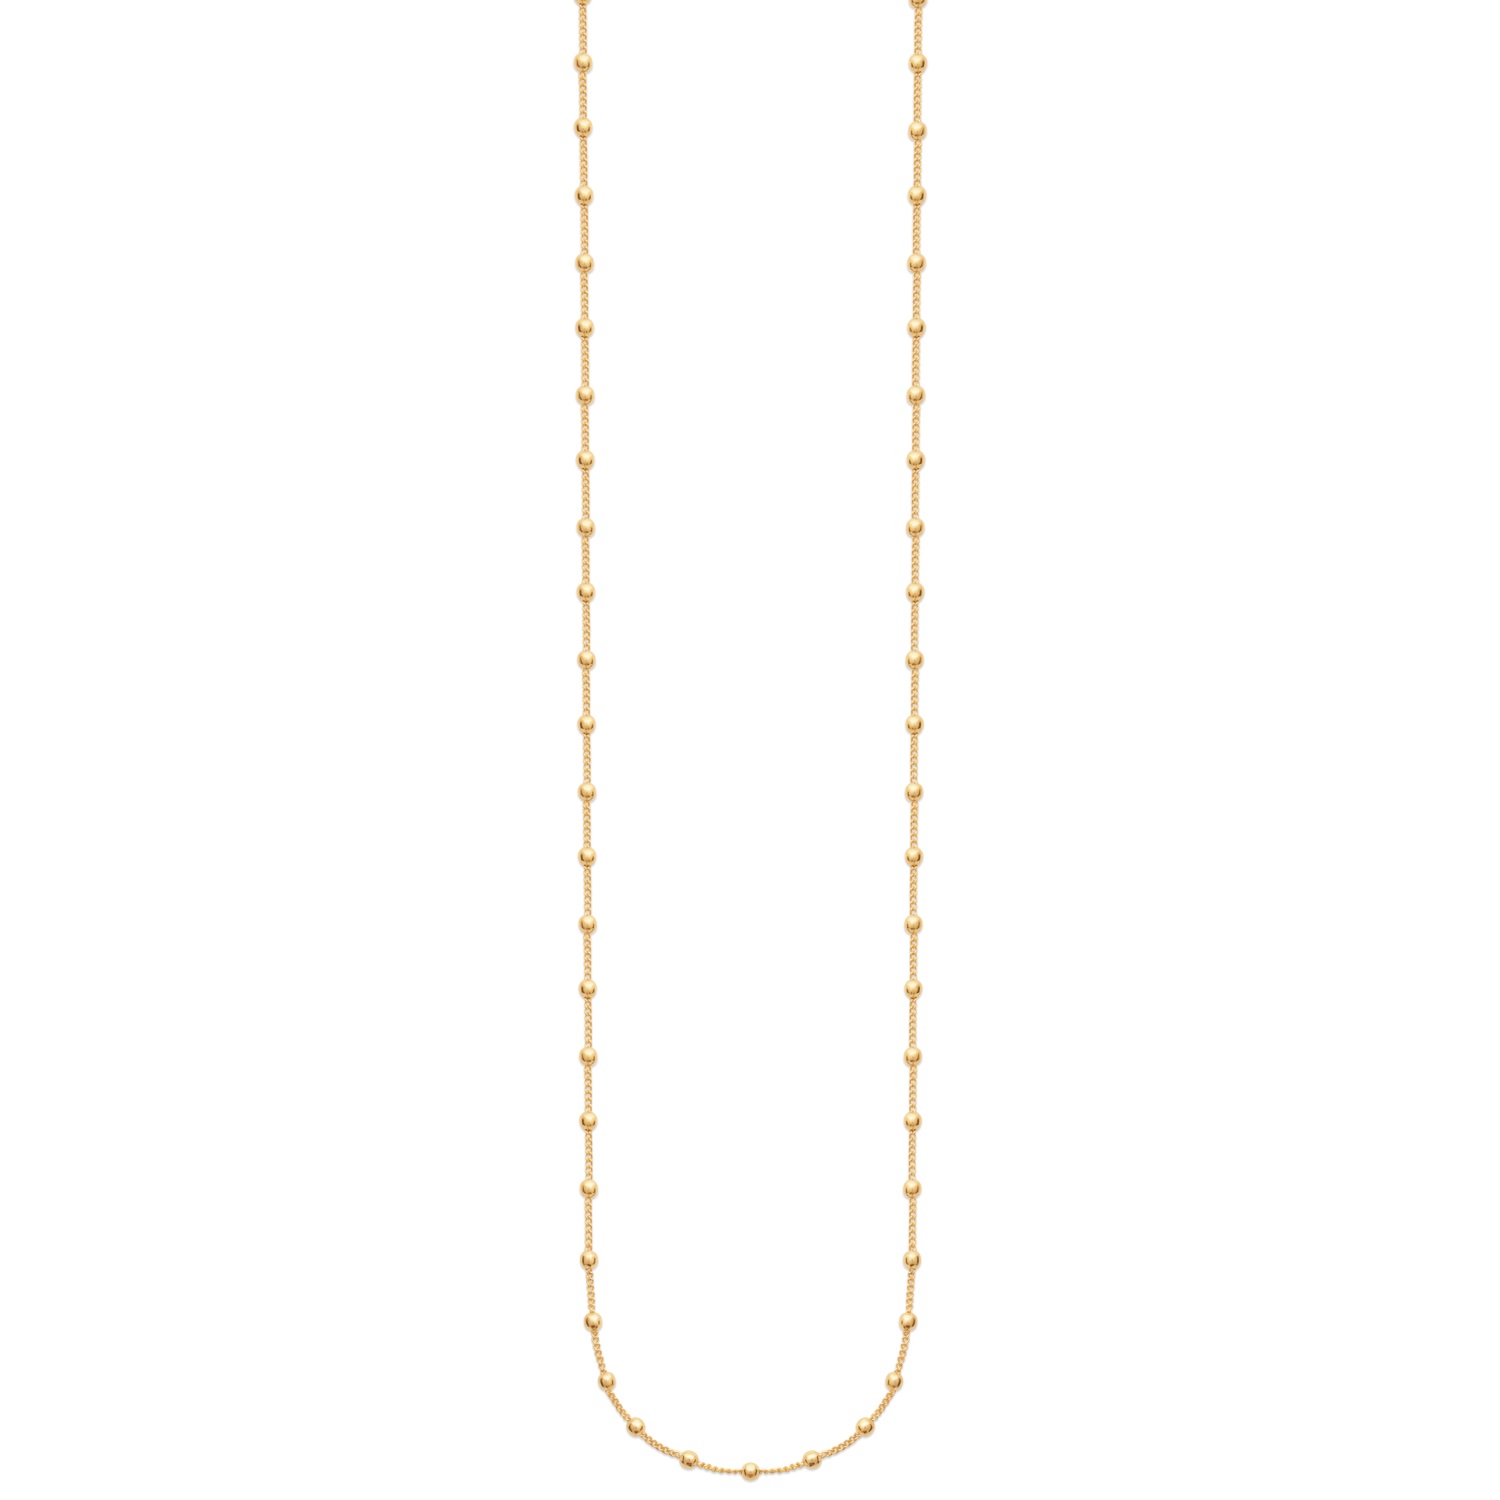 collier femme or 24 carats